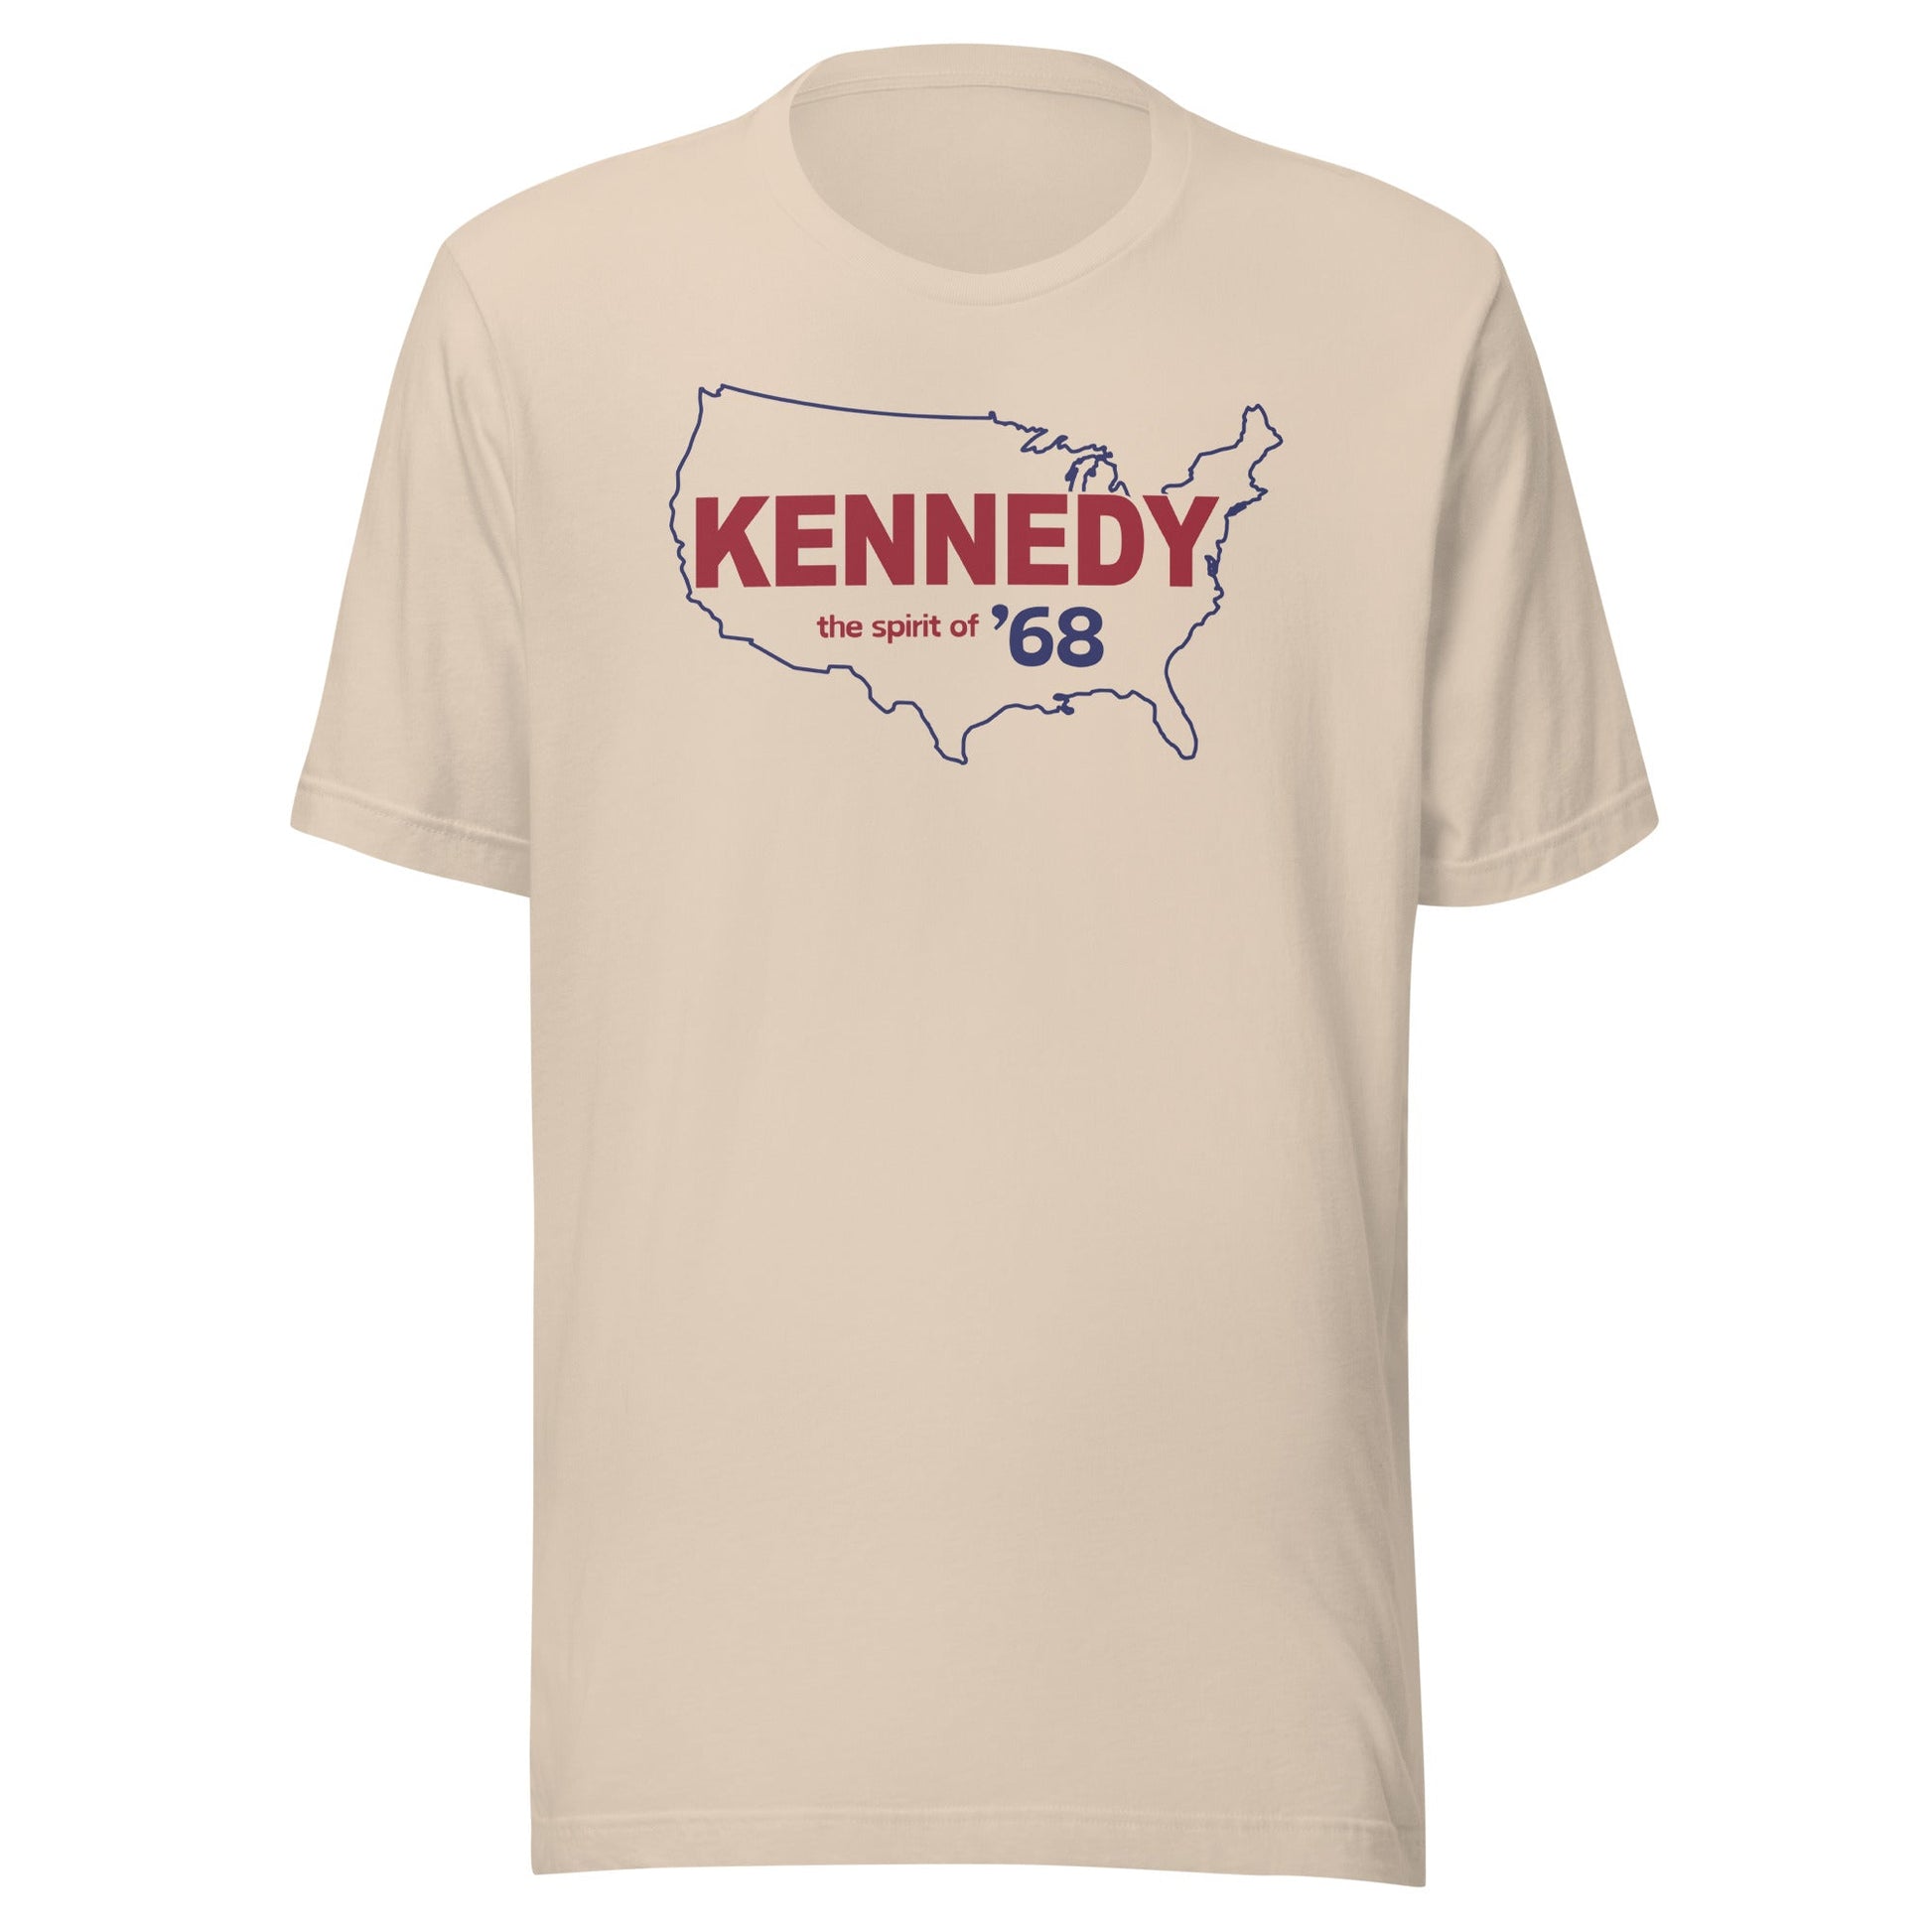 Kennedy Spirit of '68 Tee - TEAM KENNEDY. All rights reserved